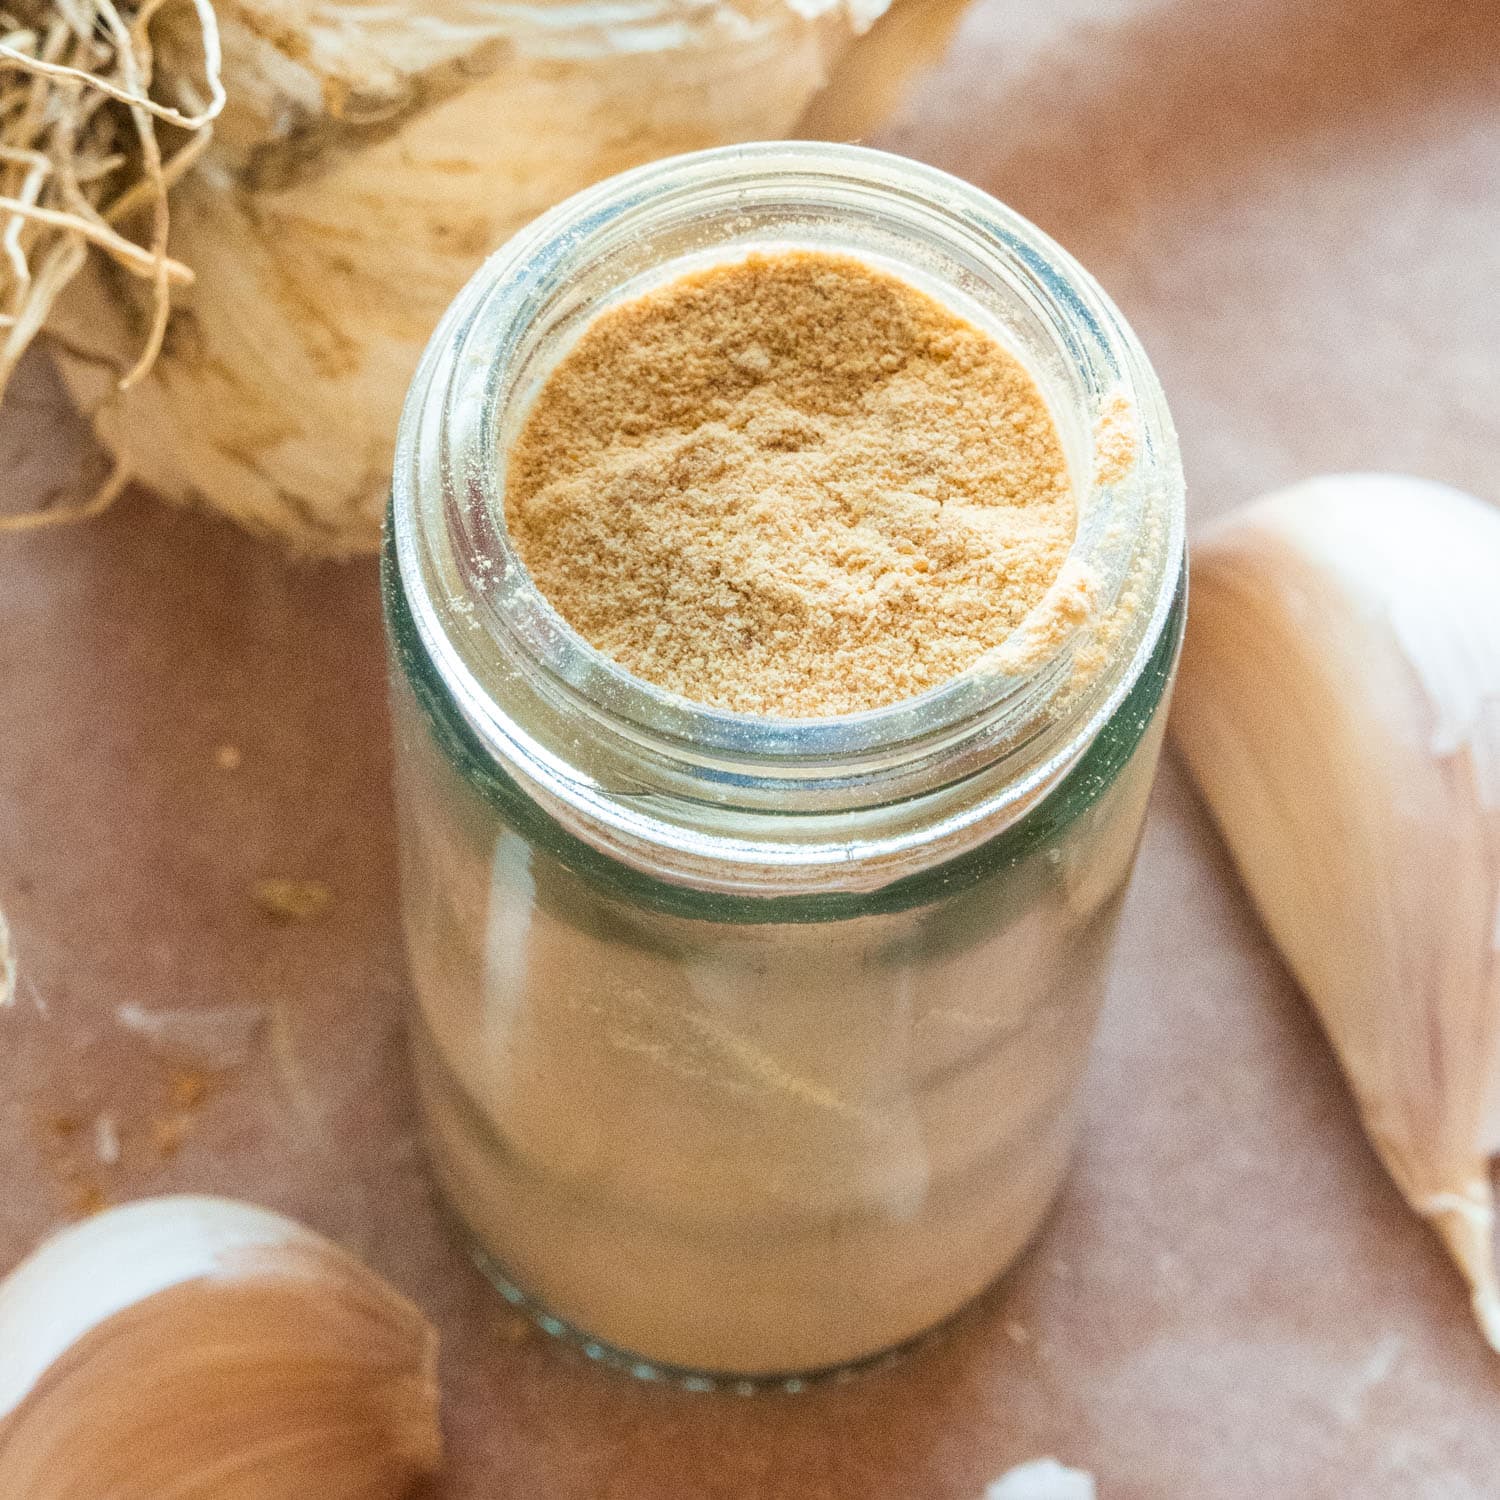 How to Make Garlic Powder in the Oven